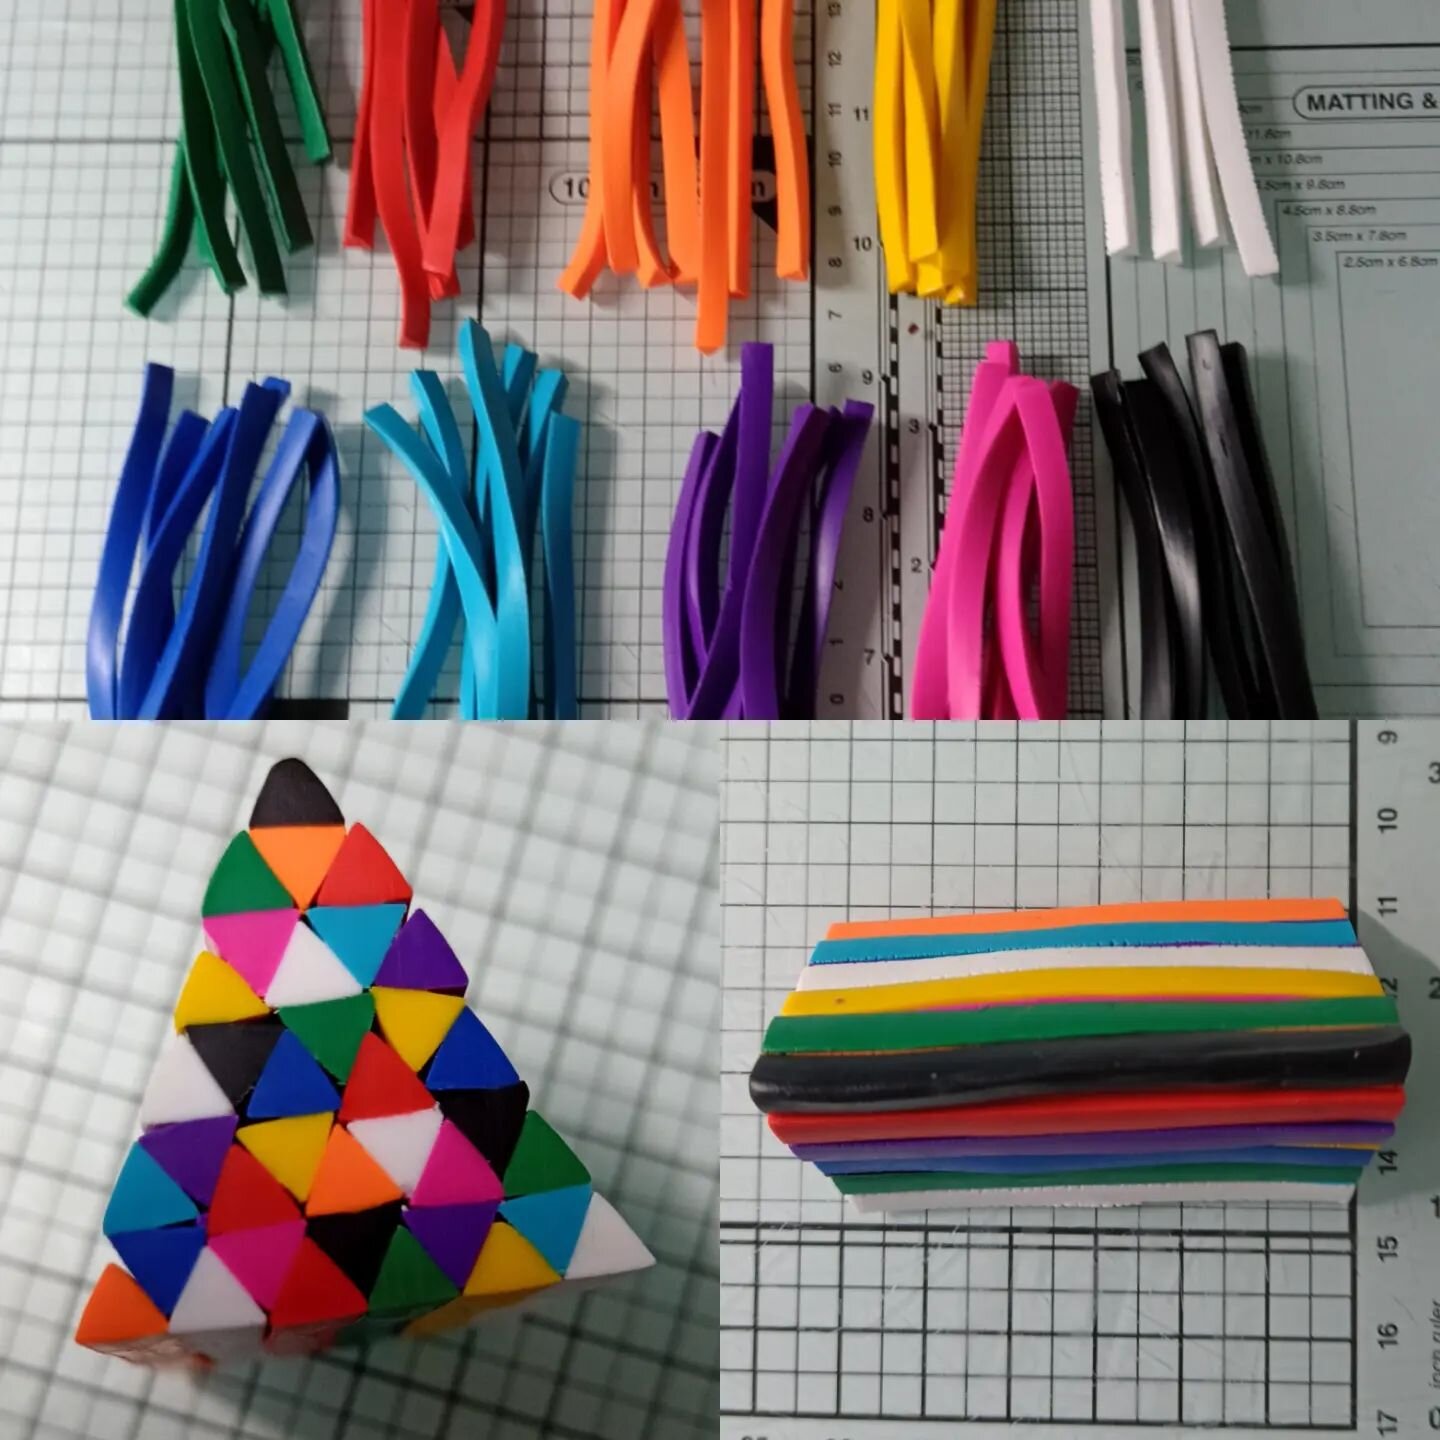 This is progress so far.  I have made a cane with some of the coloured extruded triangles and am now waiting for it to rest before I slice it up.  It already looks good I think. 

I'm planning to make some earrings, pendants and perhaps a bracelet.

